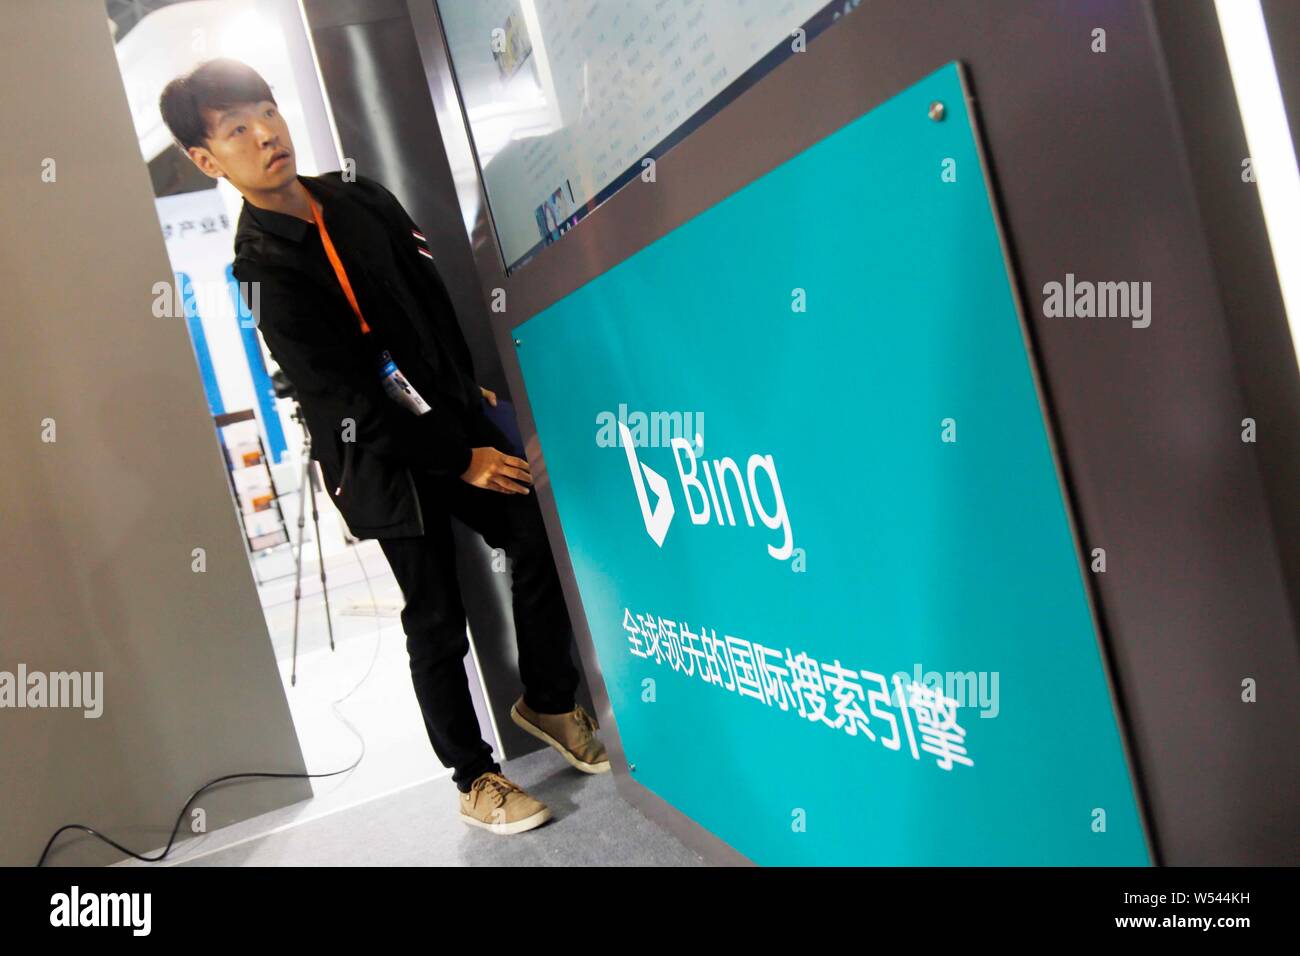 --FILE--An employee is seen at the stand of Bing search engine of Microsoft Corporation during an exhibition in Shanghai, China, 20 April 2017.   Micr Stock Photo